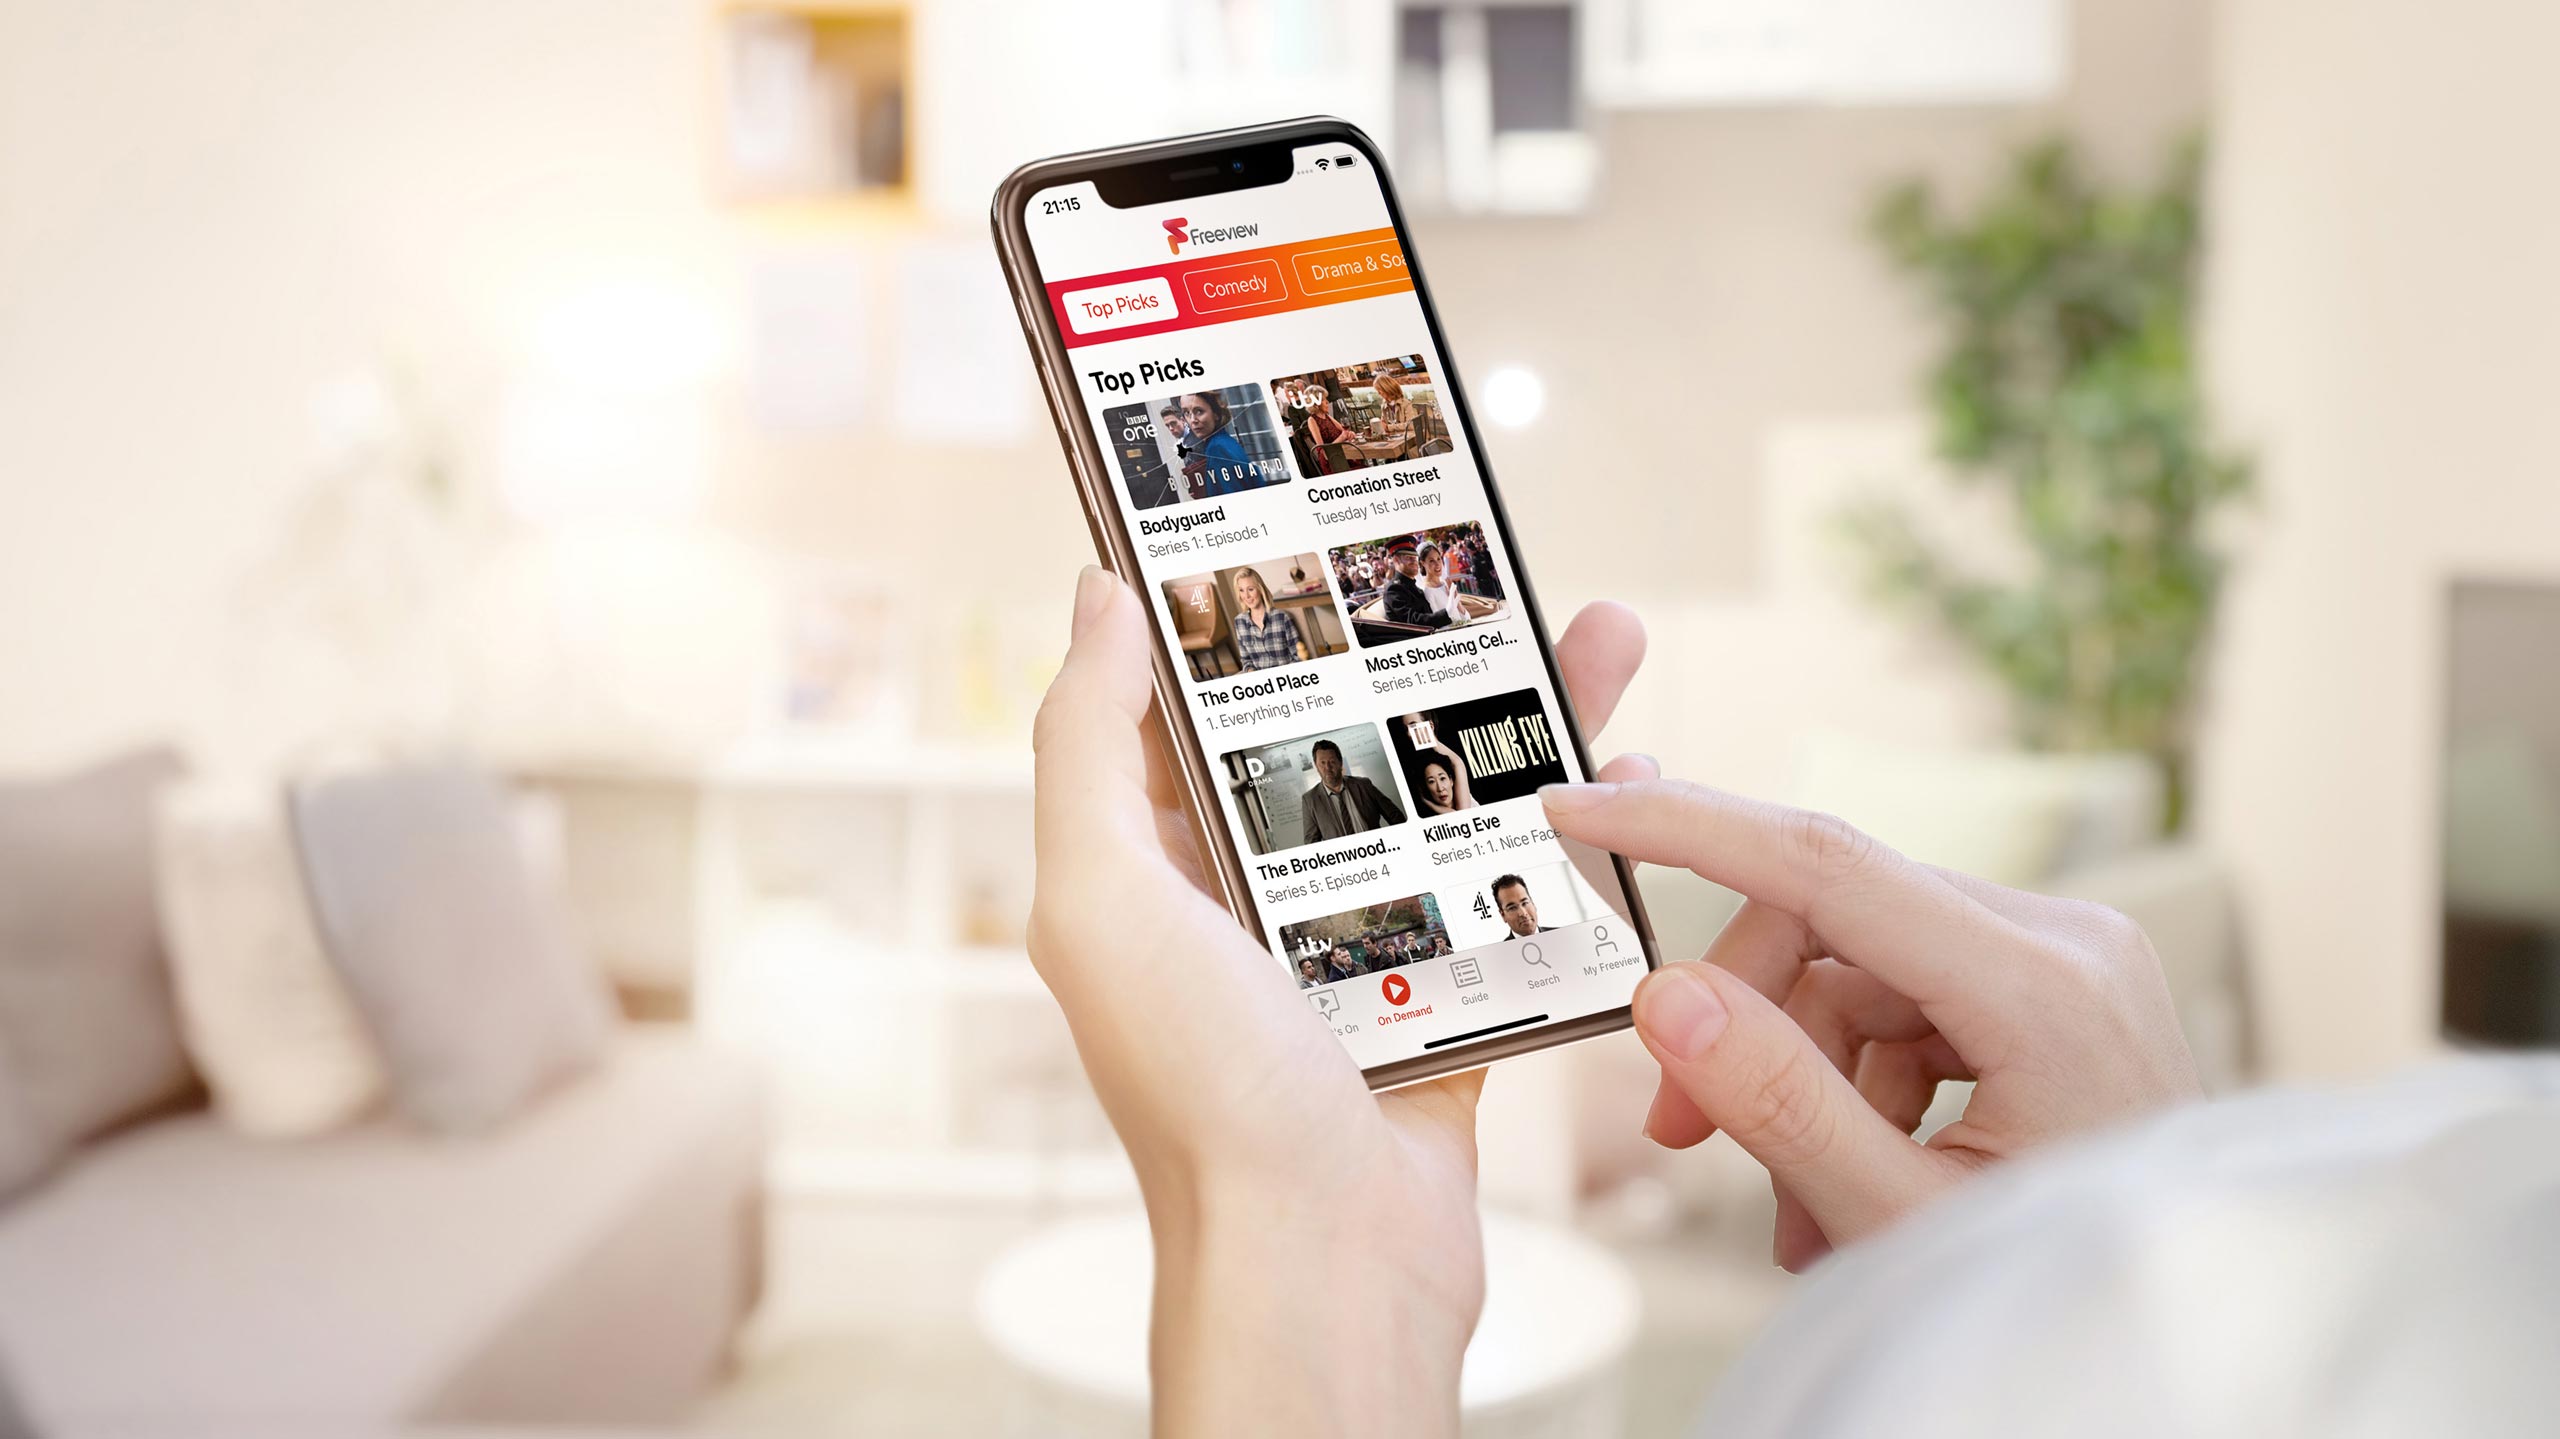 Freeview App user browsing Top Picks on s mobile phone